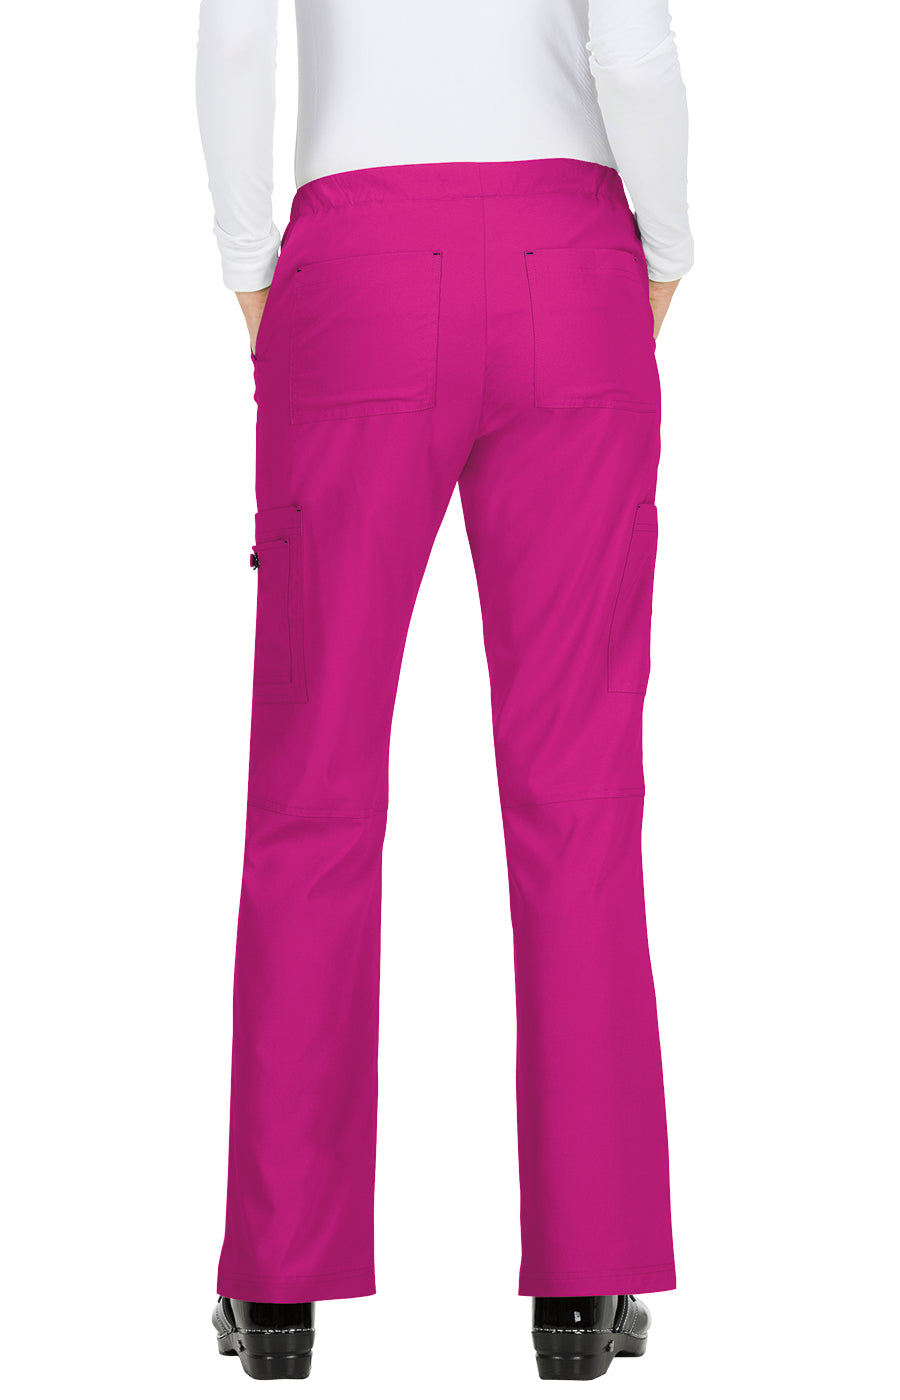 koihappiness -Home of Designer Scrubs, Medical Apparel and Accessories